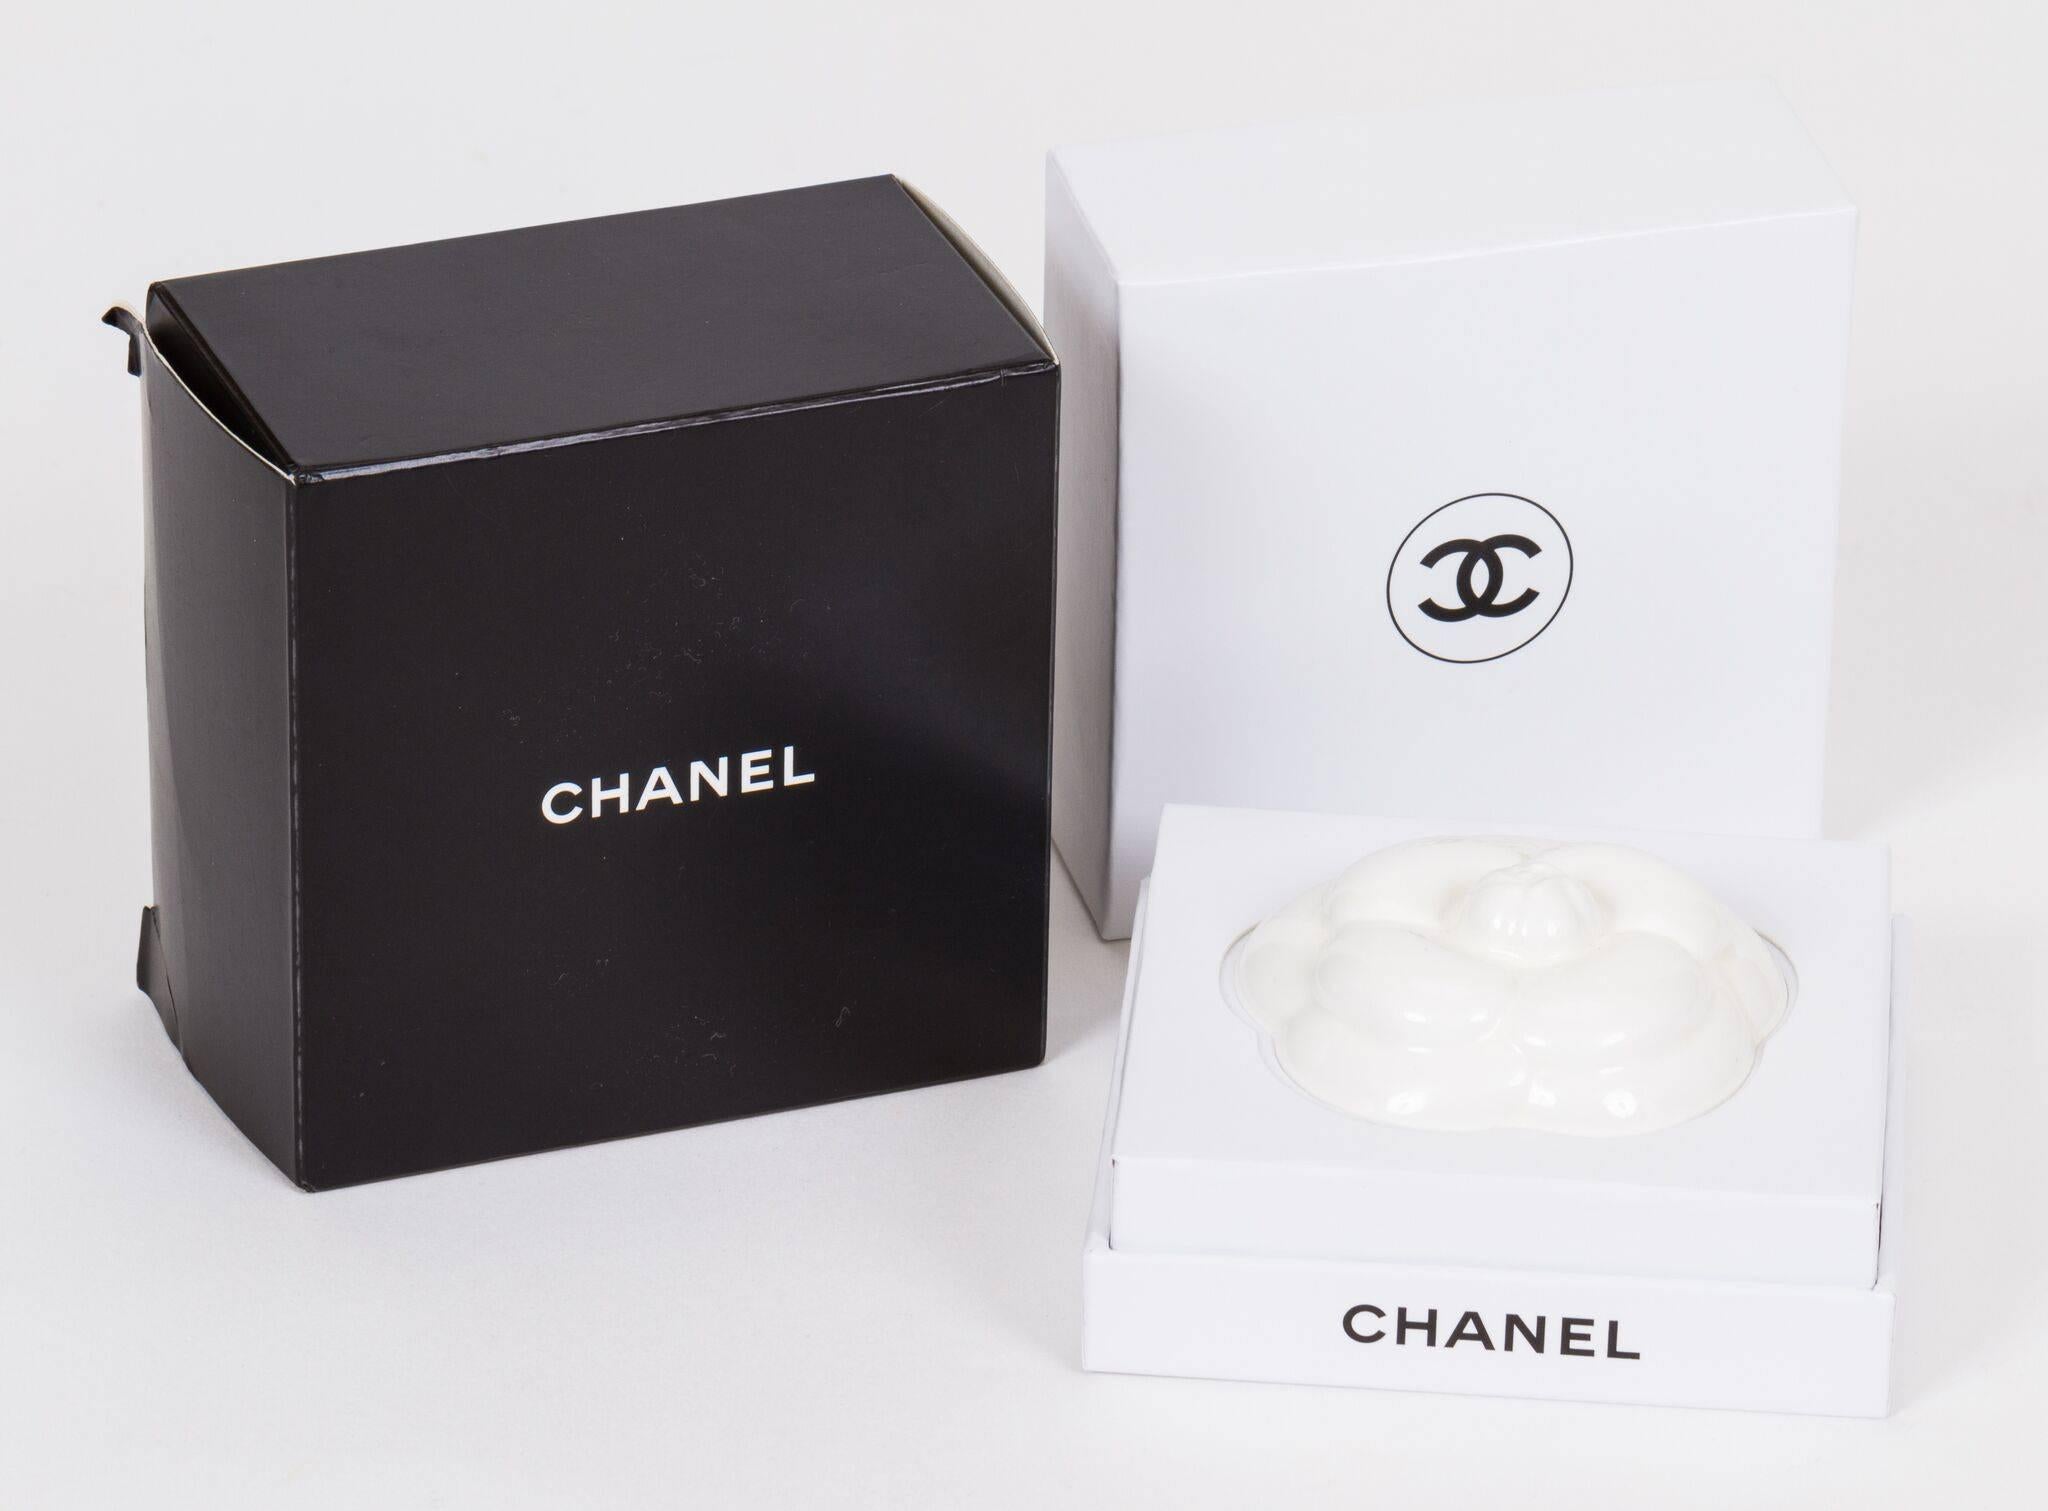 Chanel ceramic camellia perfume diffuser. Comes with original box and packaging.
